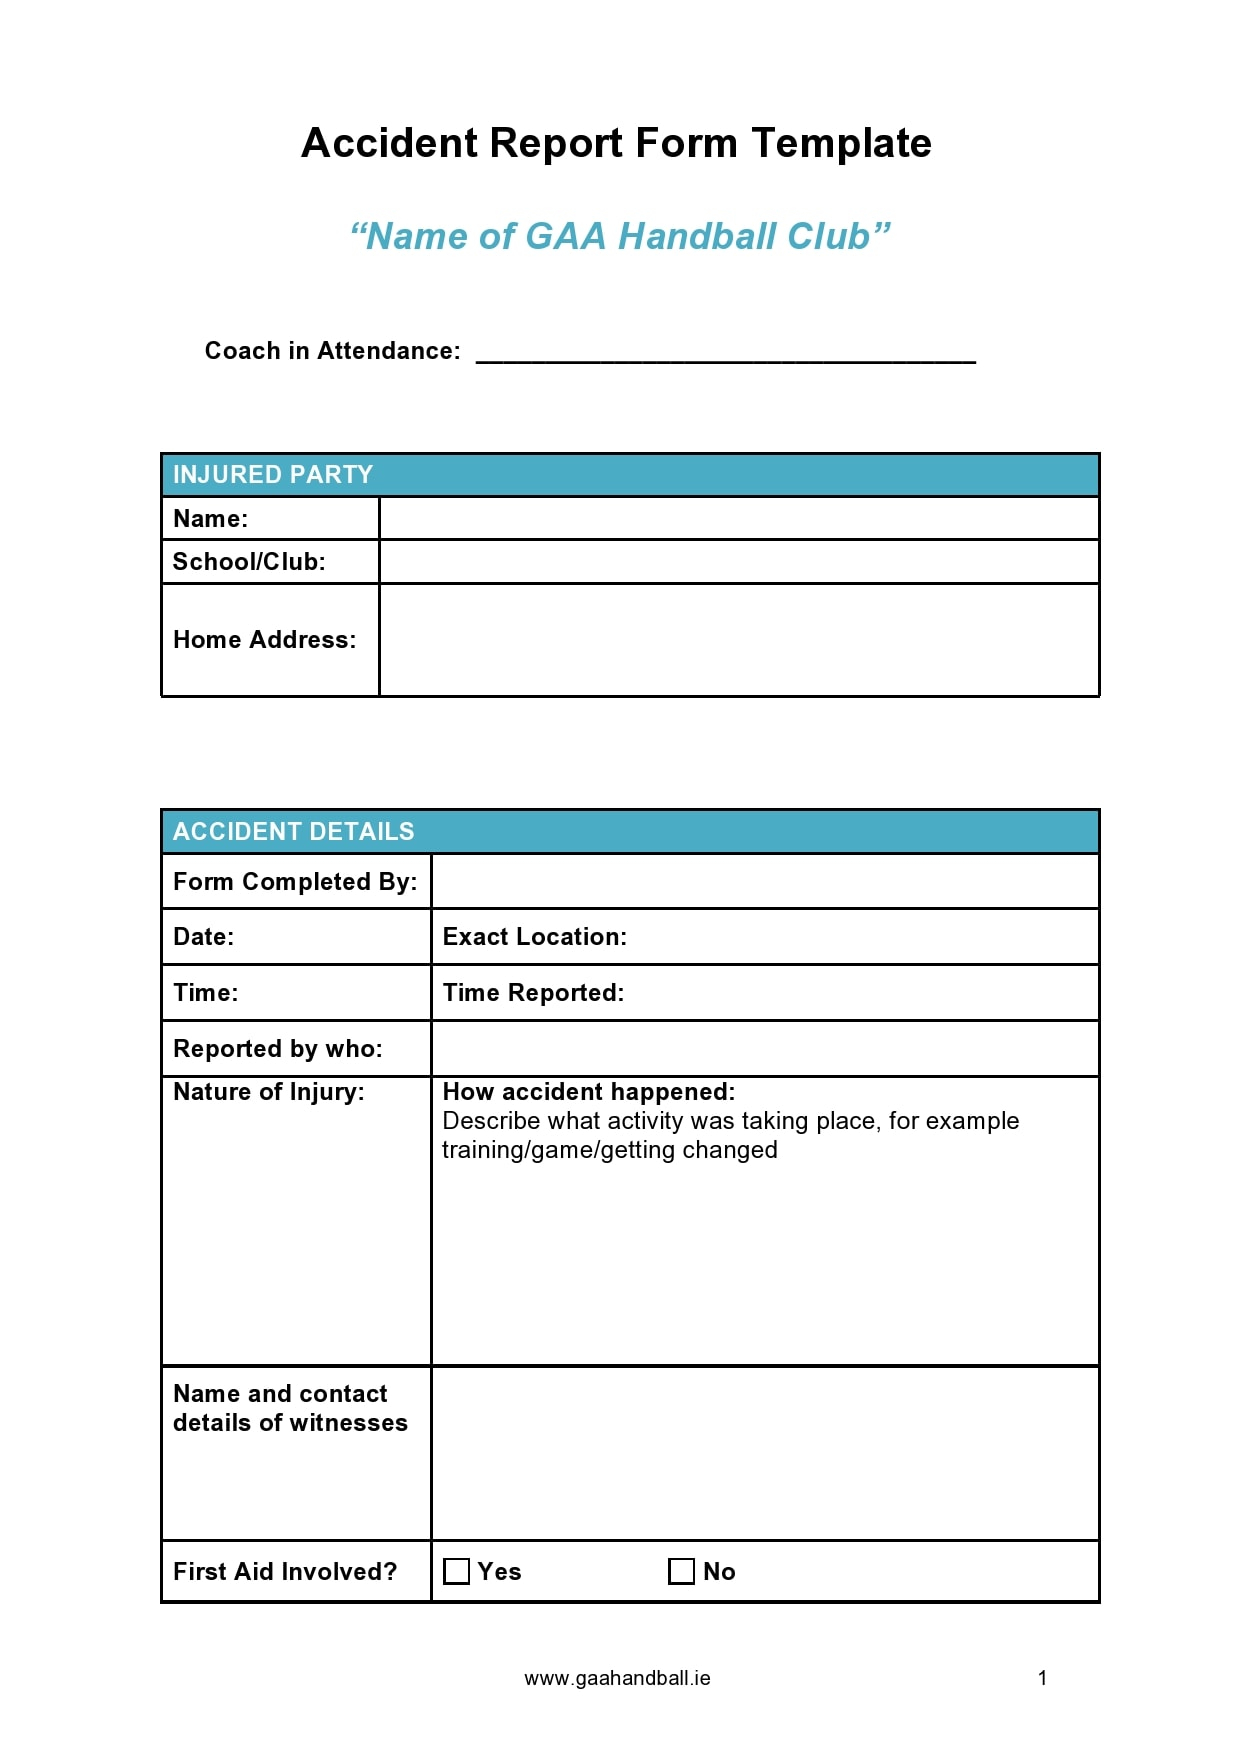 10 Accident Report Forms (Car, Work Injury, more) - TemplateArchive Intended For Motor Vehicle Accident Report Form Template